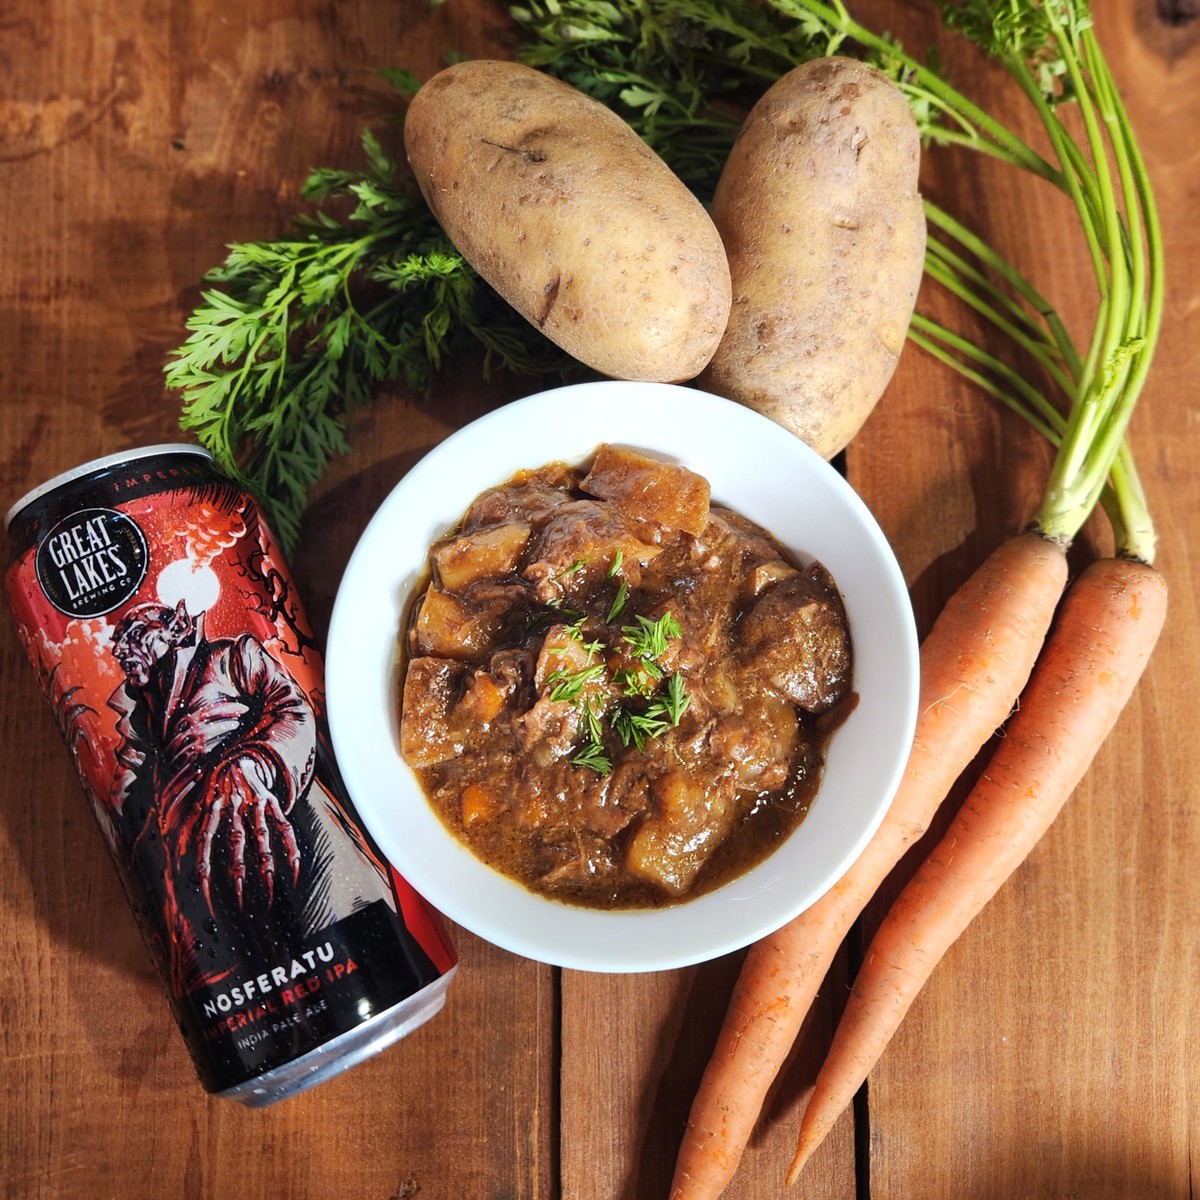 Beef stew with vegetables and Nosferatu Imperial Red IPA